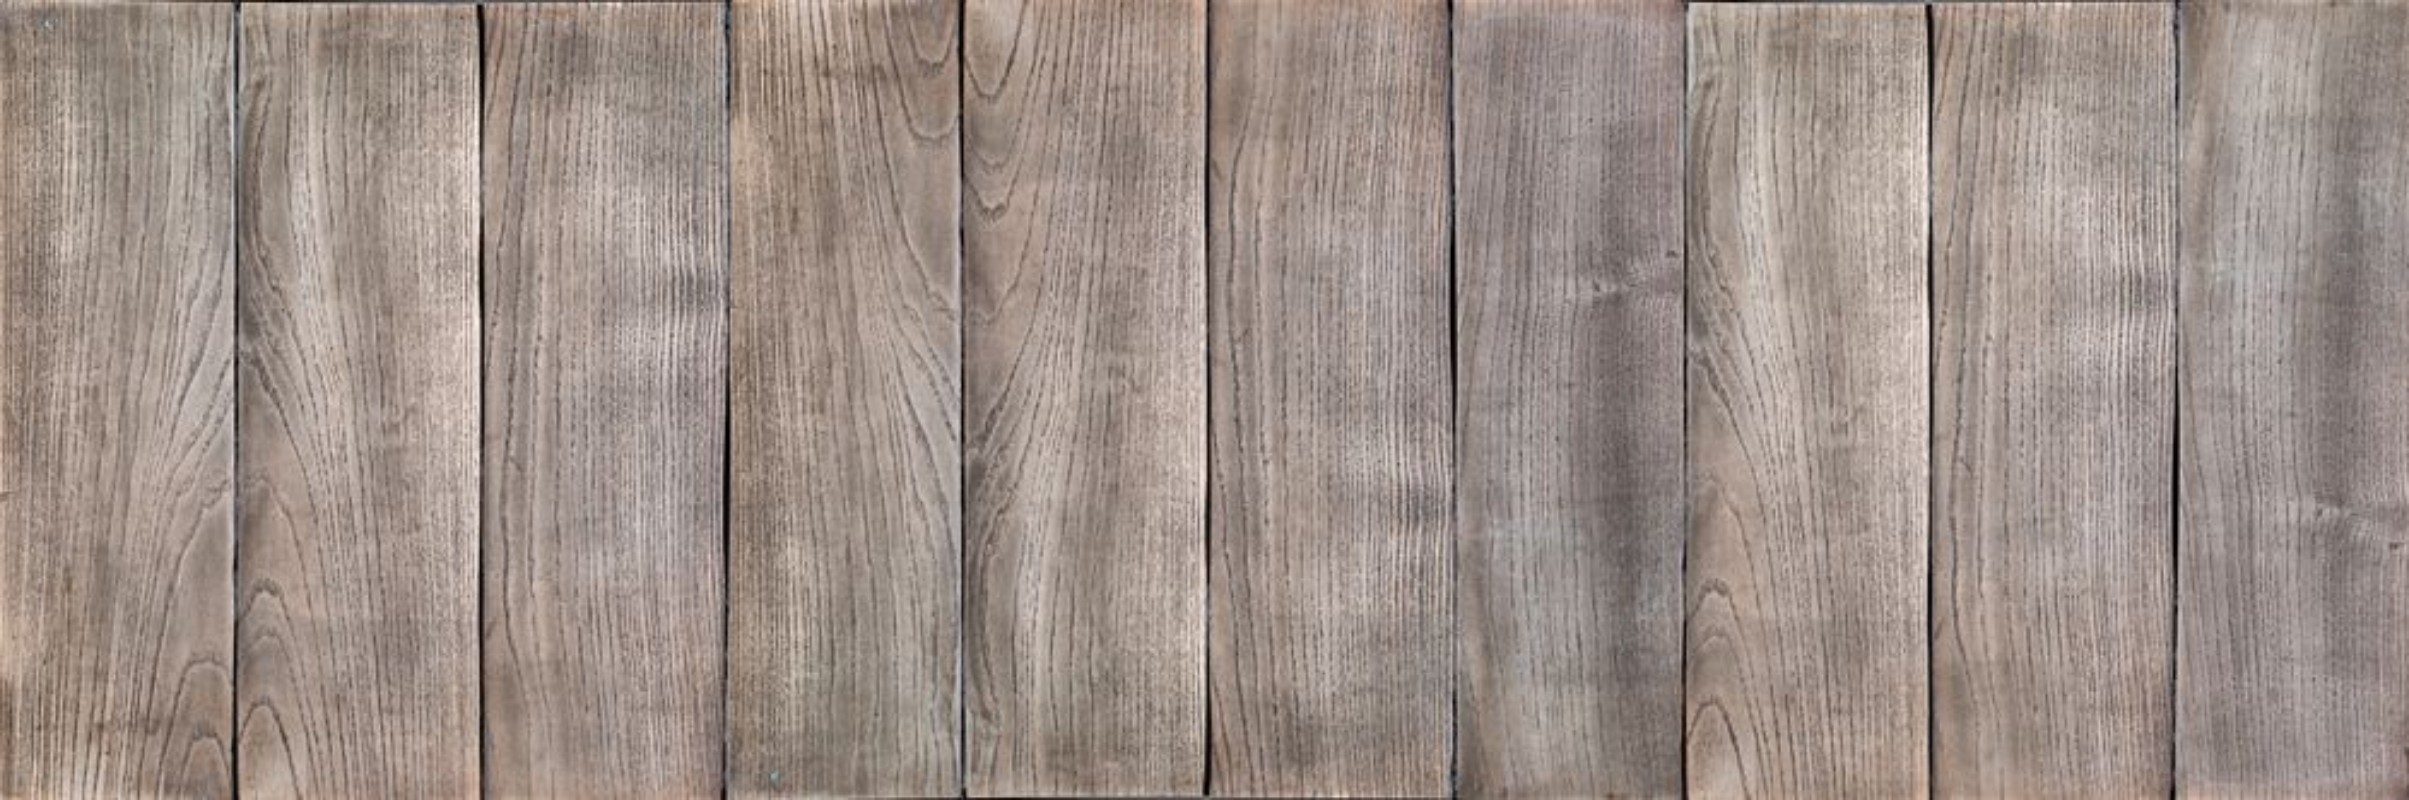 Picture of Wood background or texture